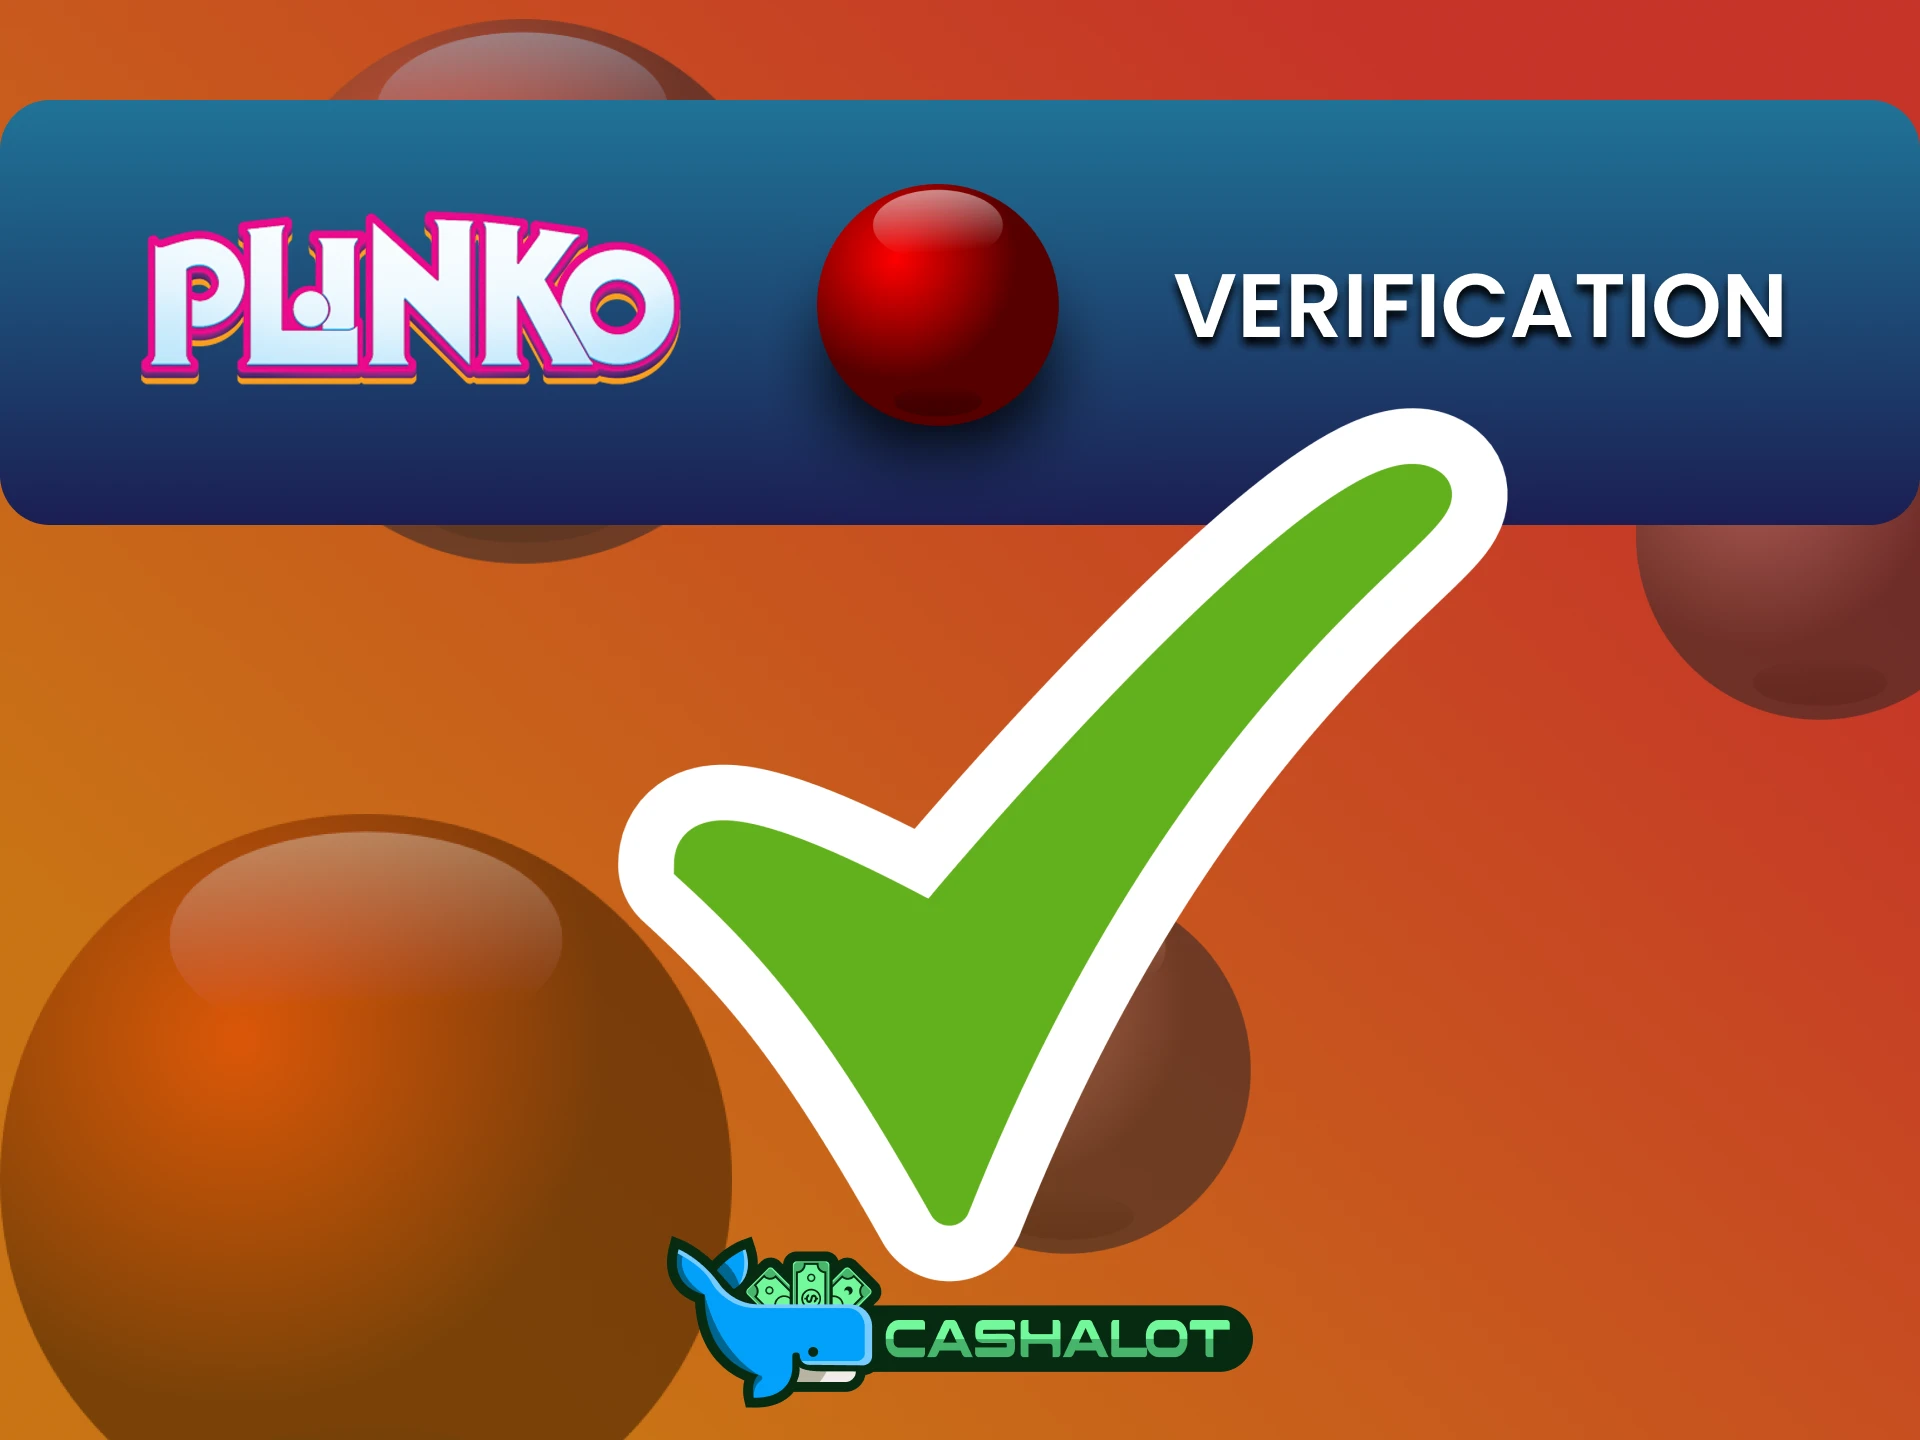 Be sure to fill out the information on the Cashalot website to play Plinko.